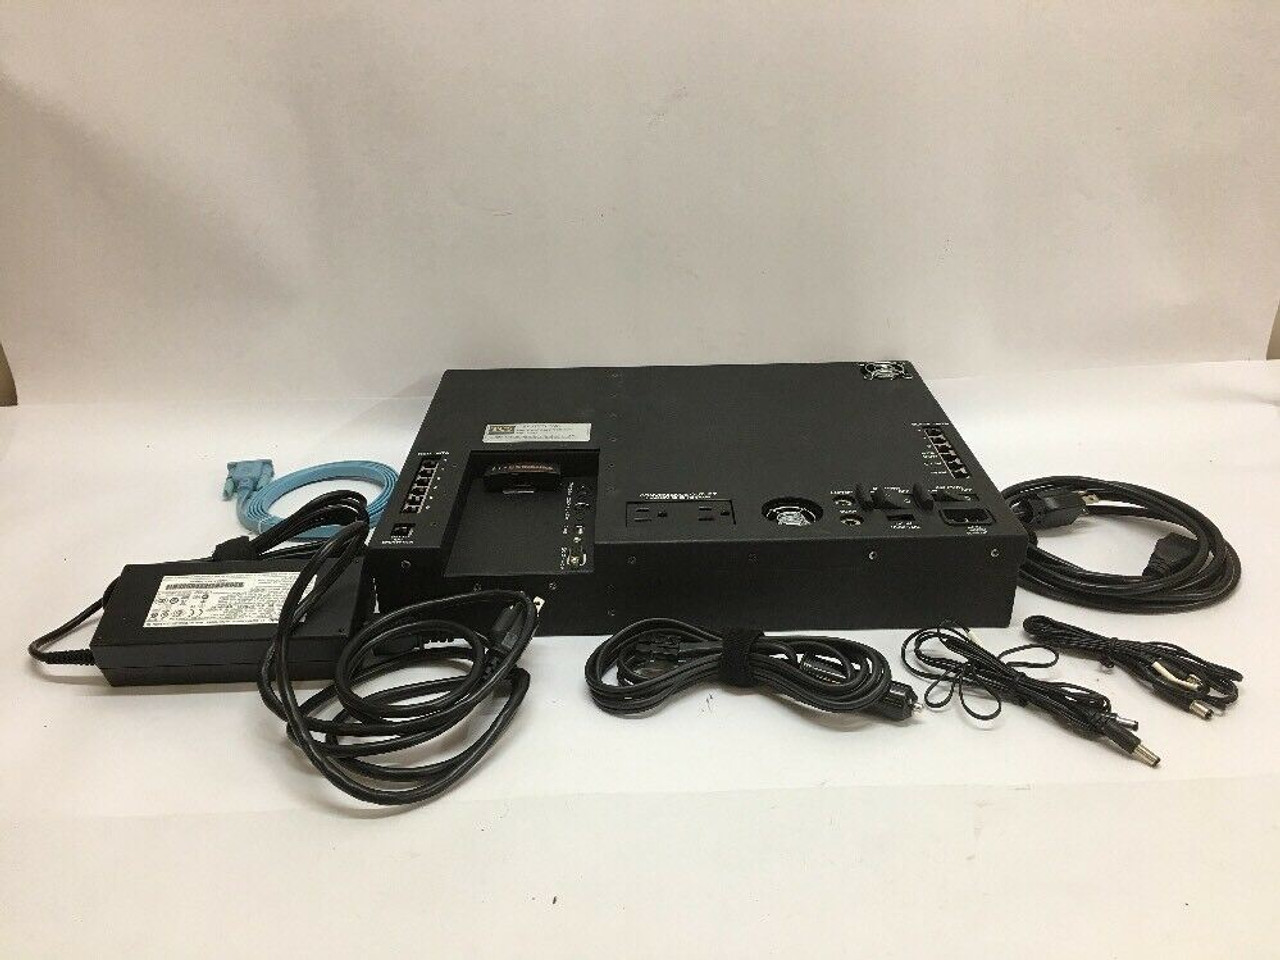 TCS SwiftLink Custom Tracking Terminal Communications System (w/ Case)